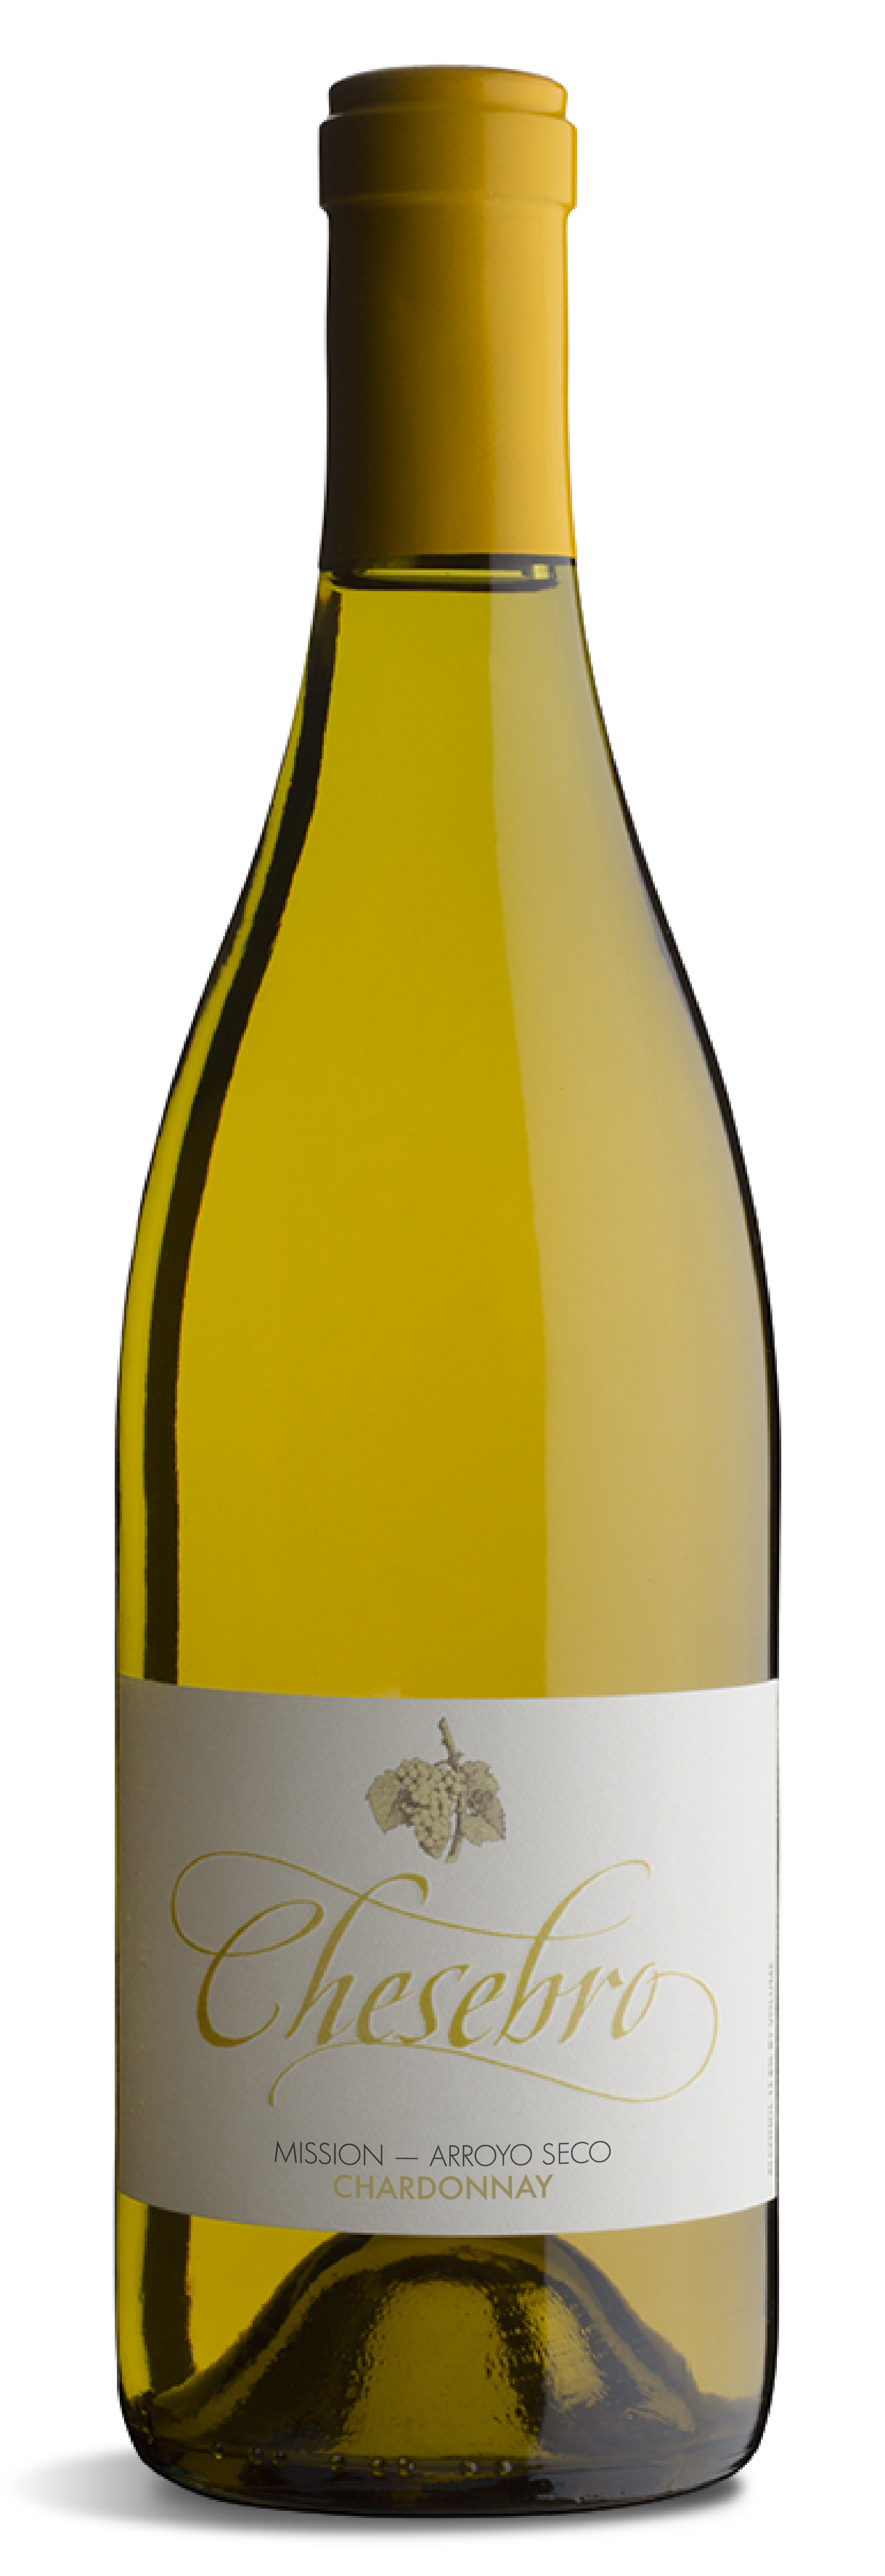 Product Image for Chardonnay - Mission - Arroyo Seco-2018